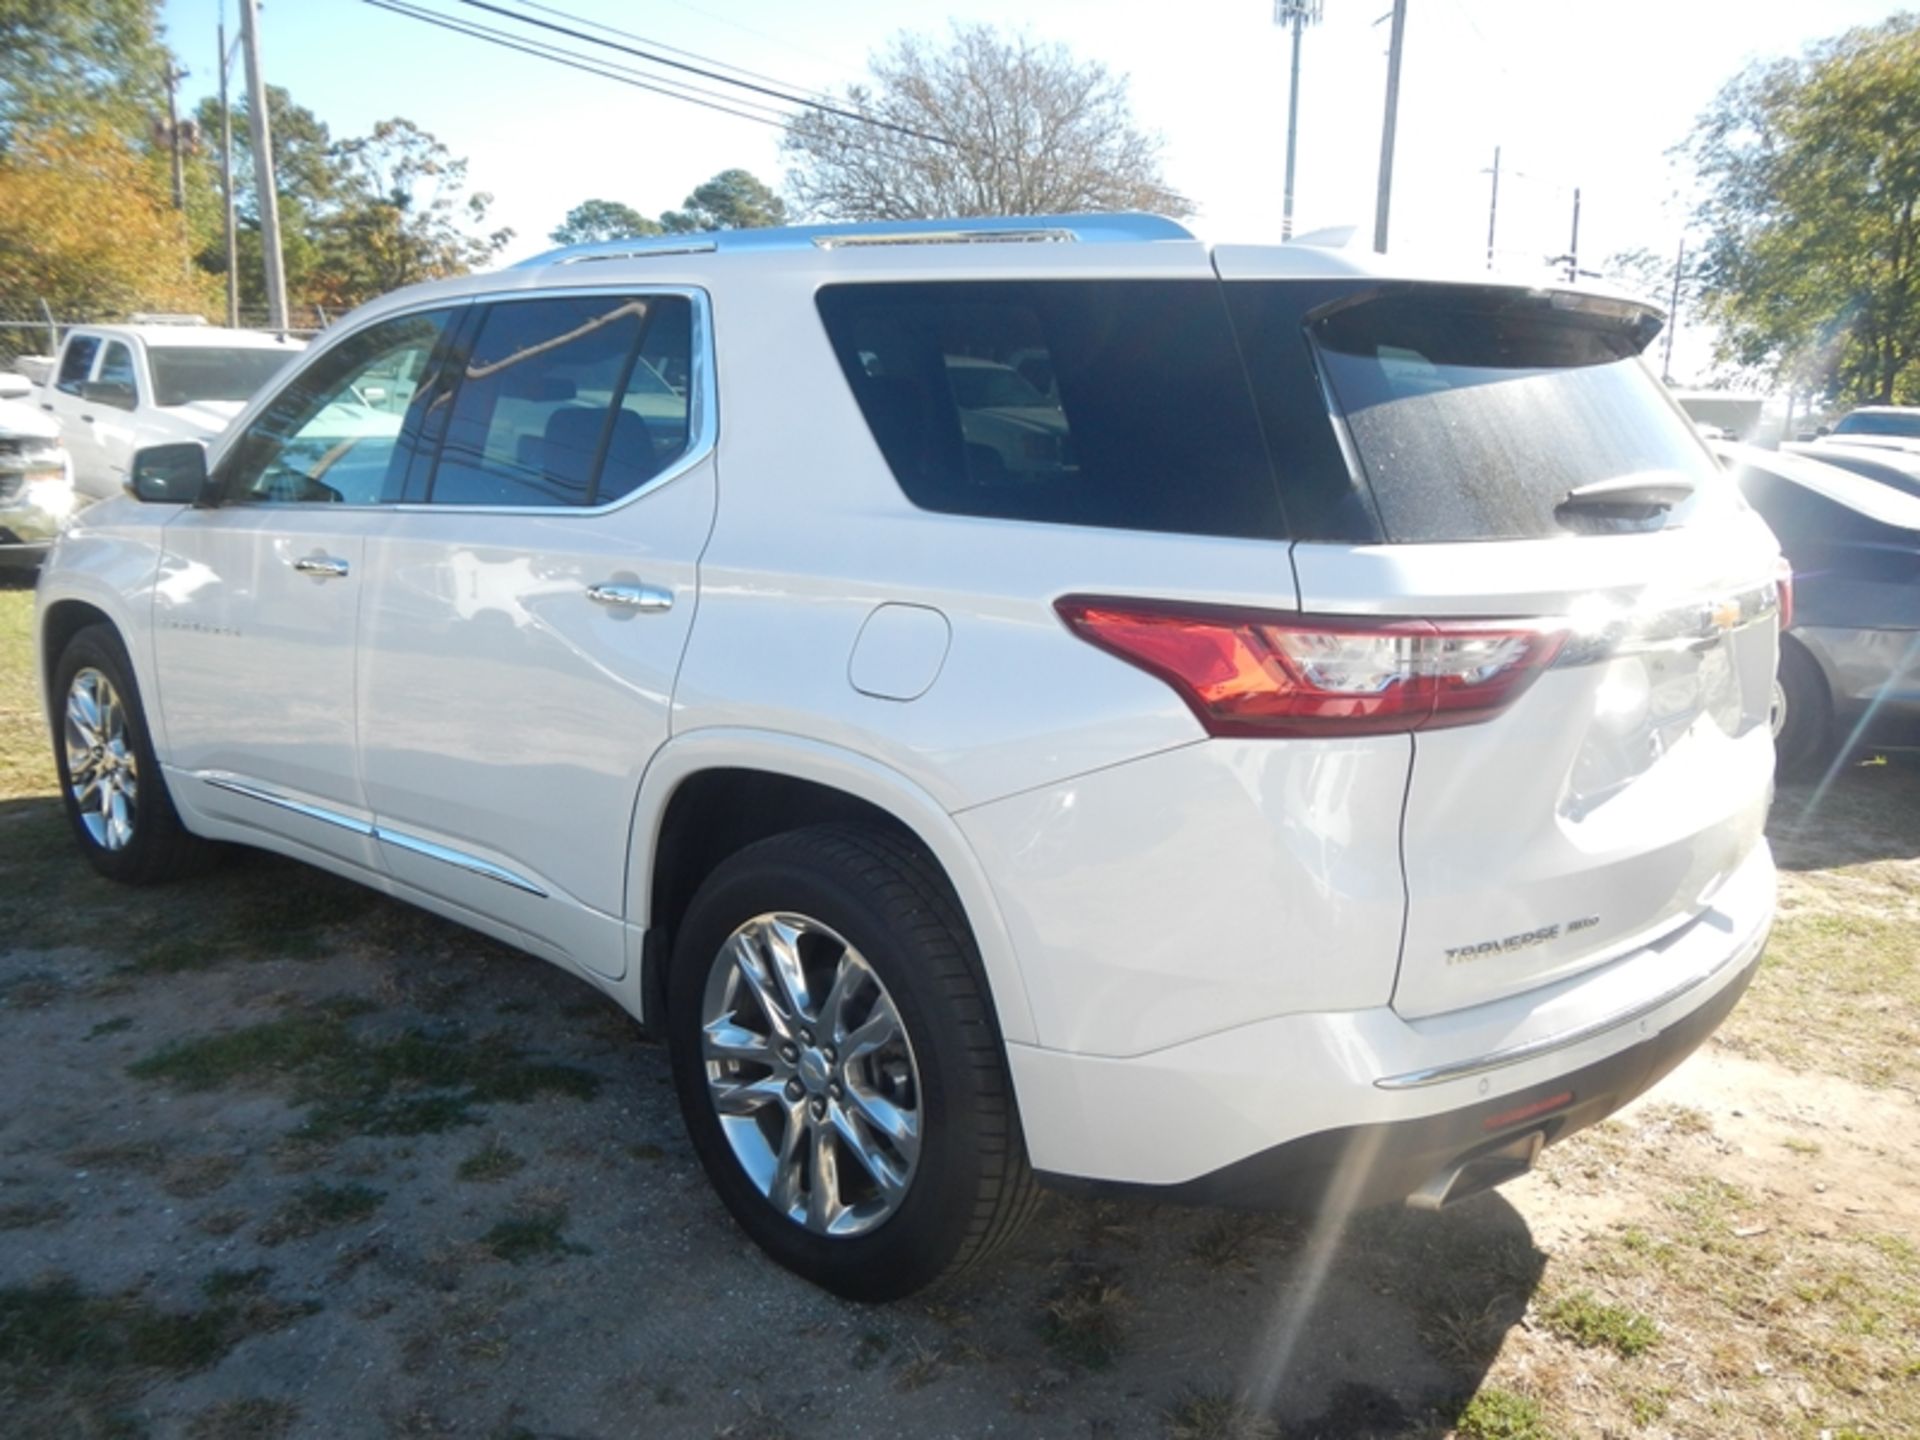 2018 CHEVROLET Traverse High Country - 106,668 miles showing - 1GNEVKKW6JJ103642 - Image 4 of 8